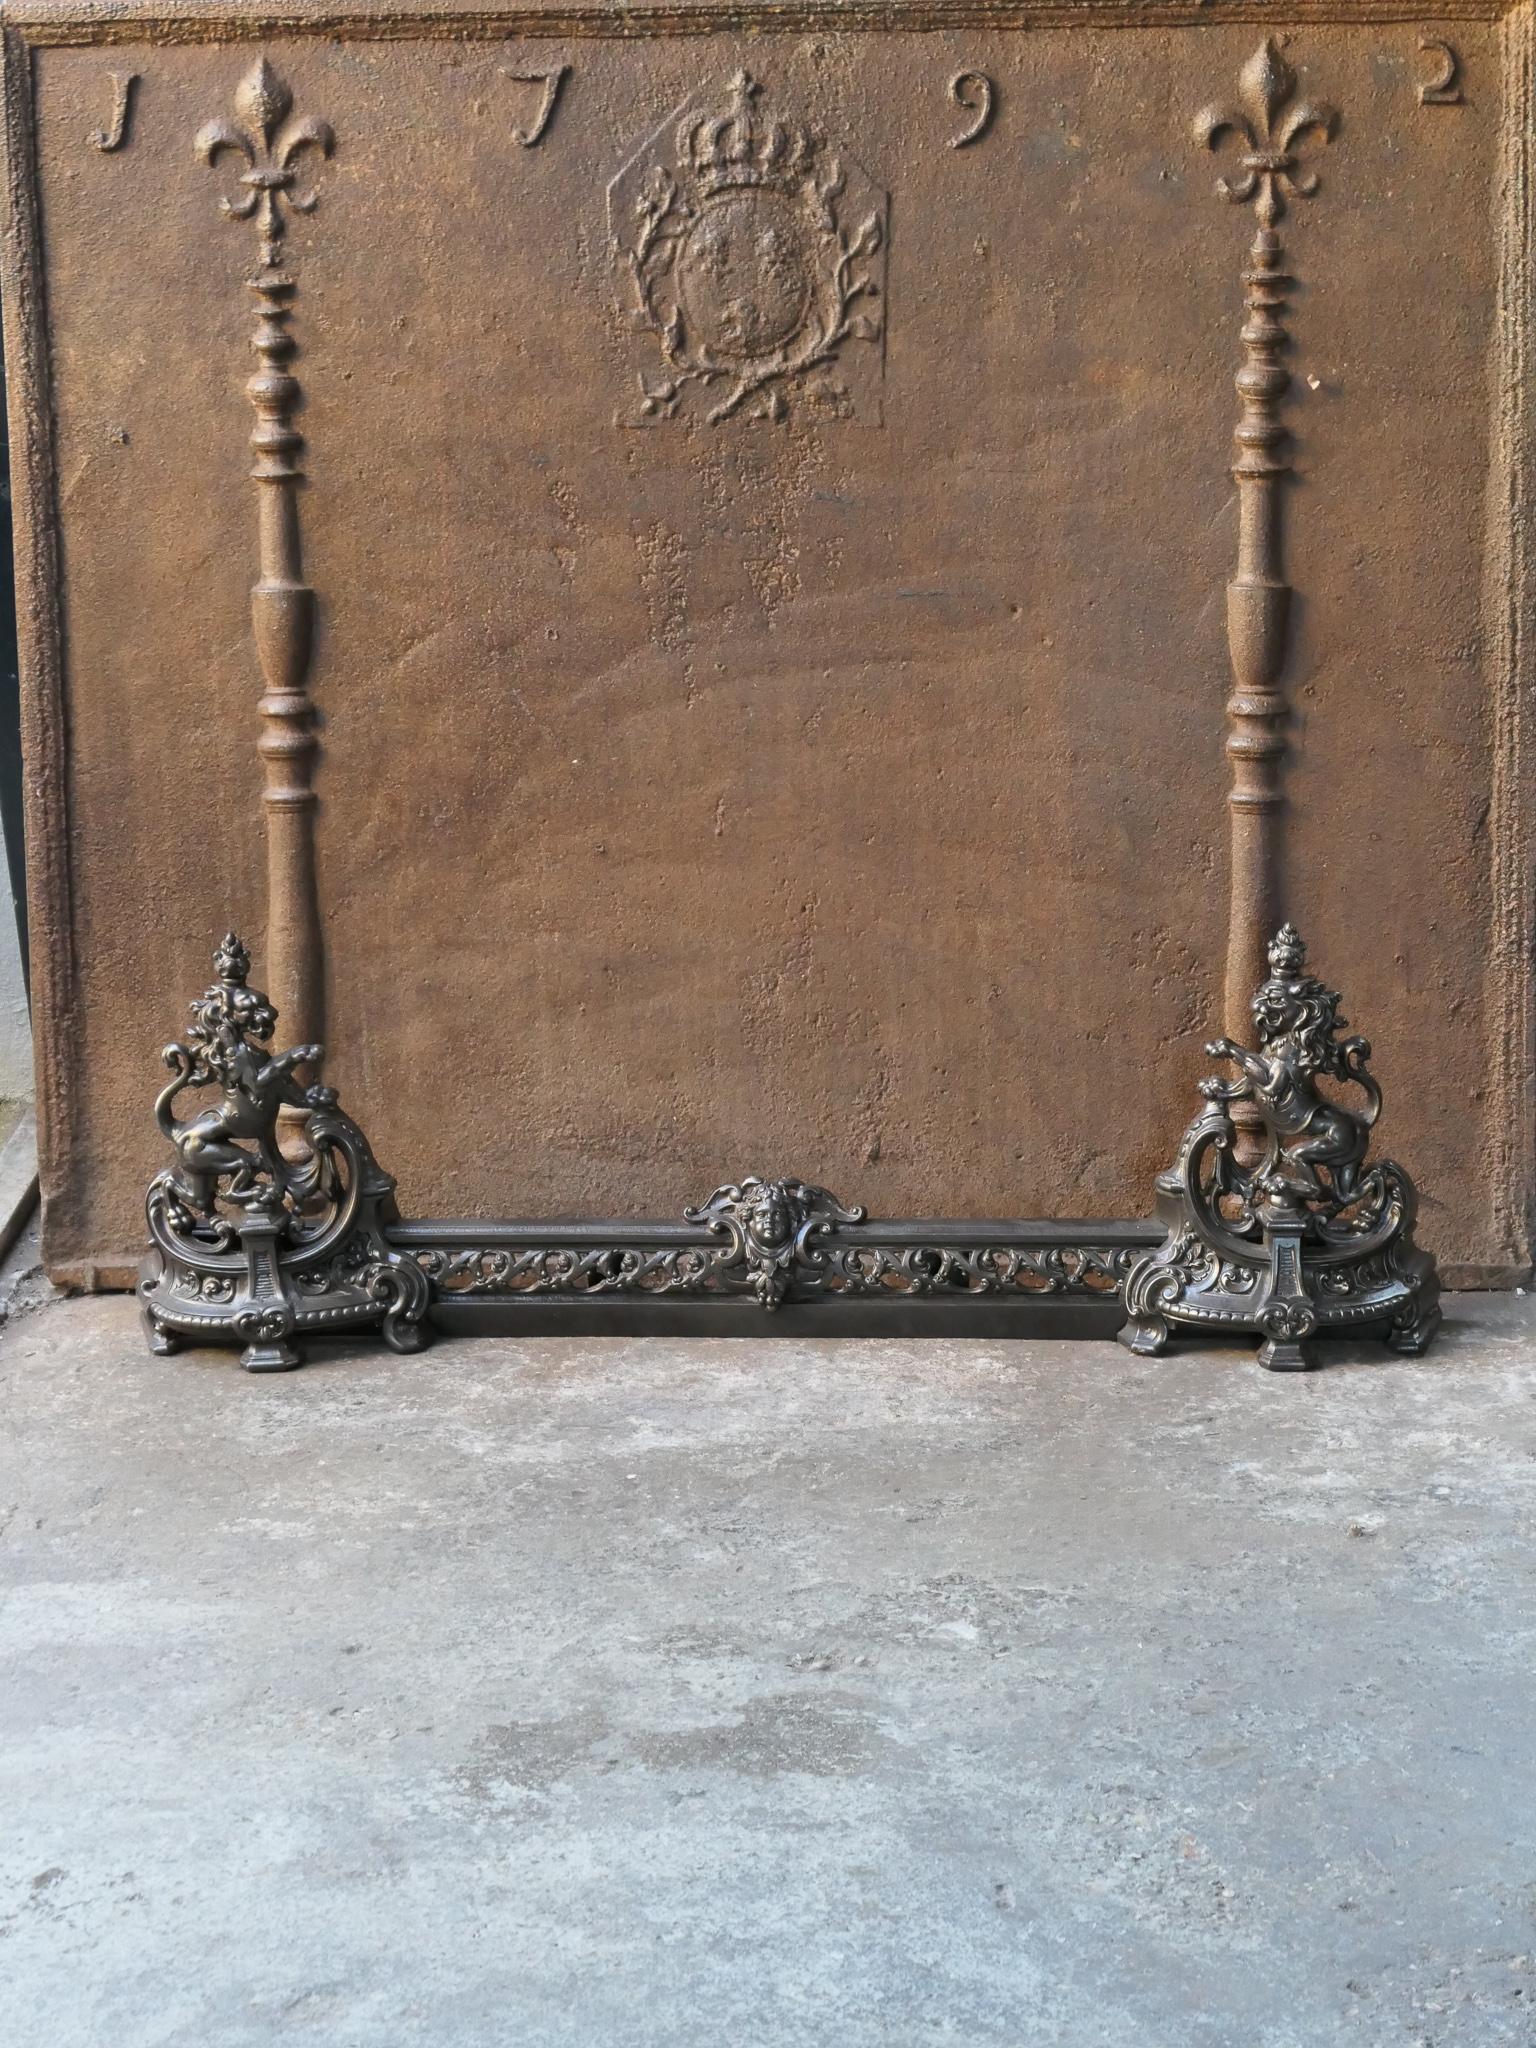 Beautiful 19th century French Napoleon III period fire fender. The fender is made of cast iron and wrought iron. The condition is good.







